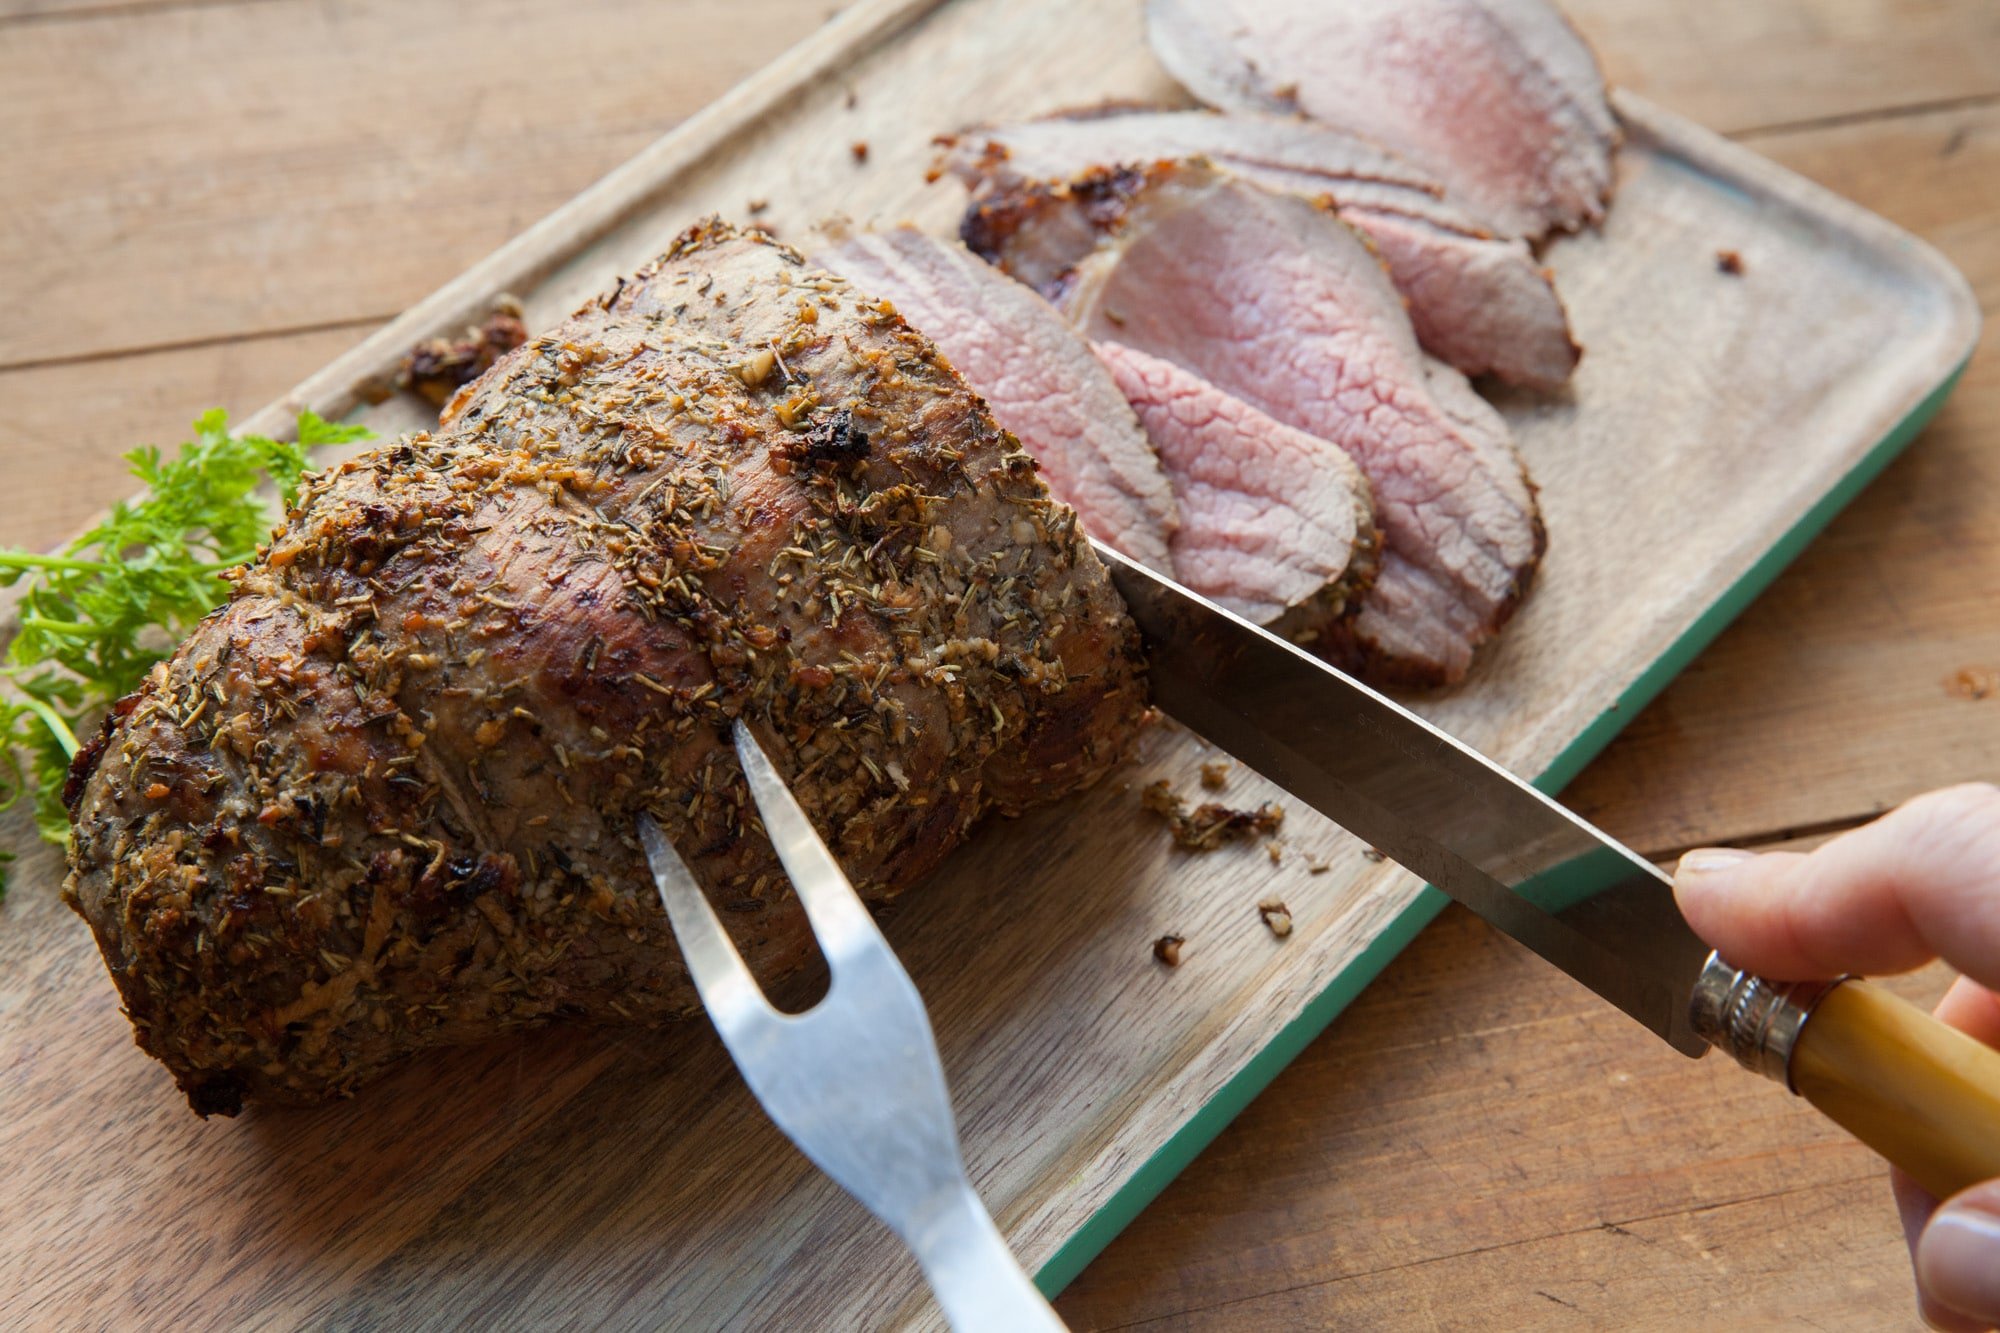 Roast Eye of Round Beef with Thyme and Rosemary being sliced on a cutting board.